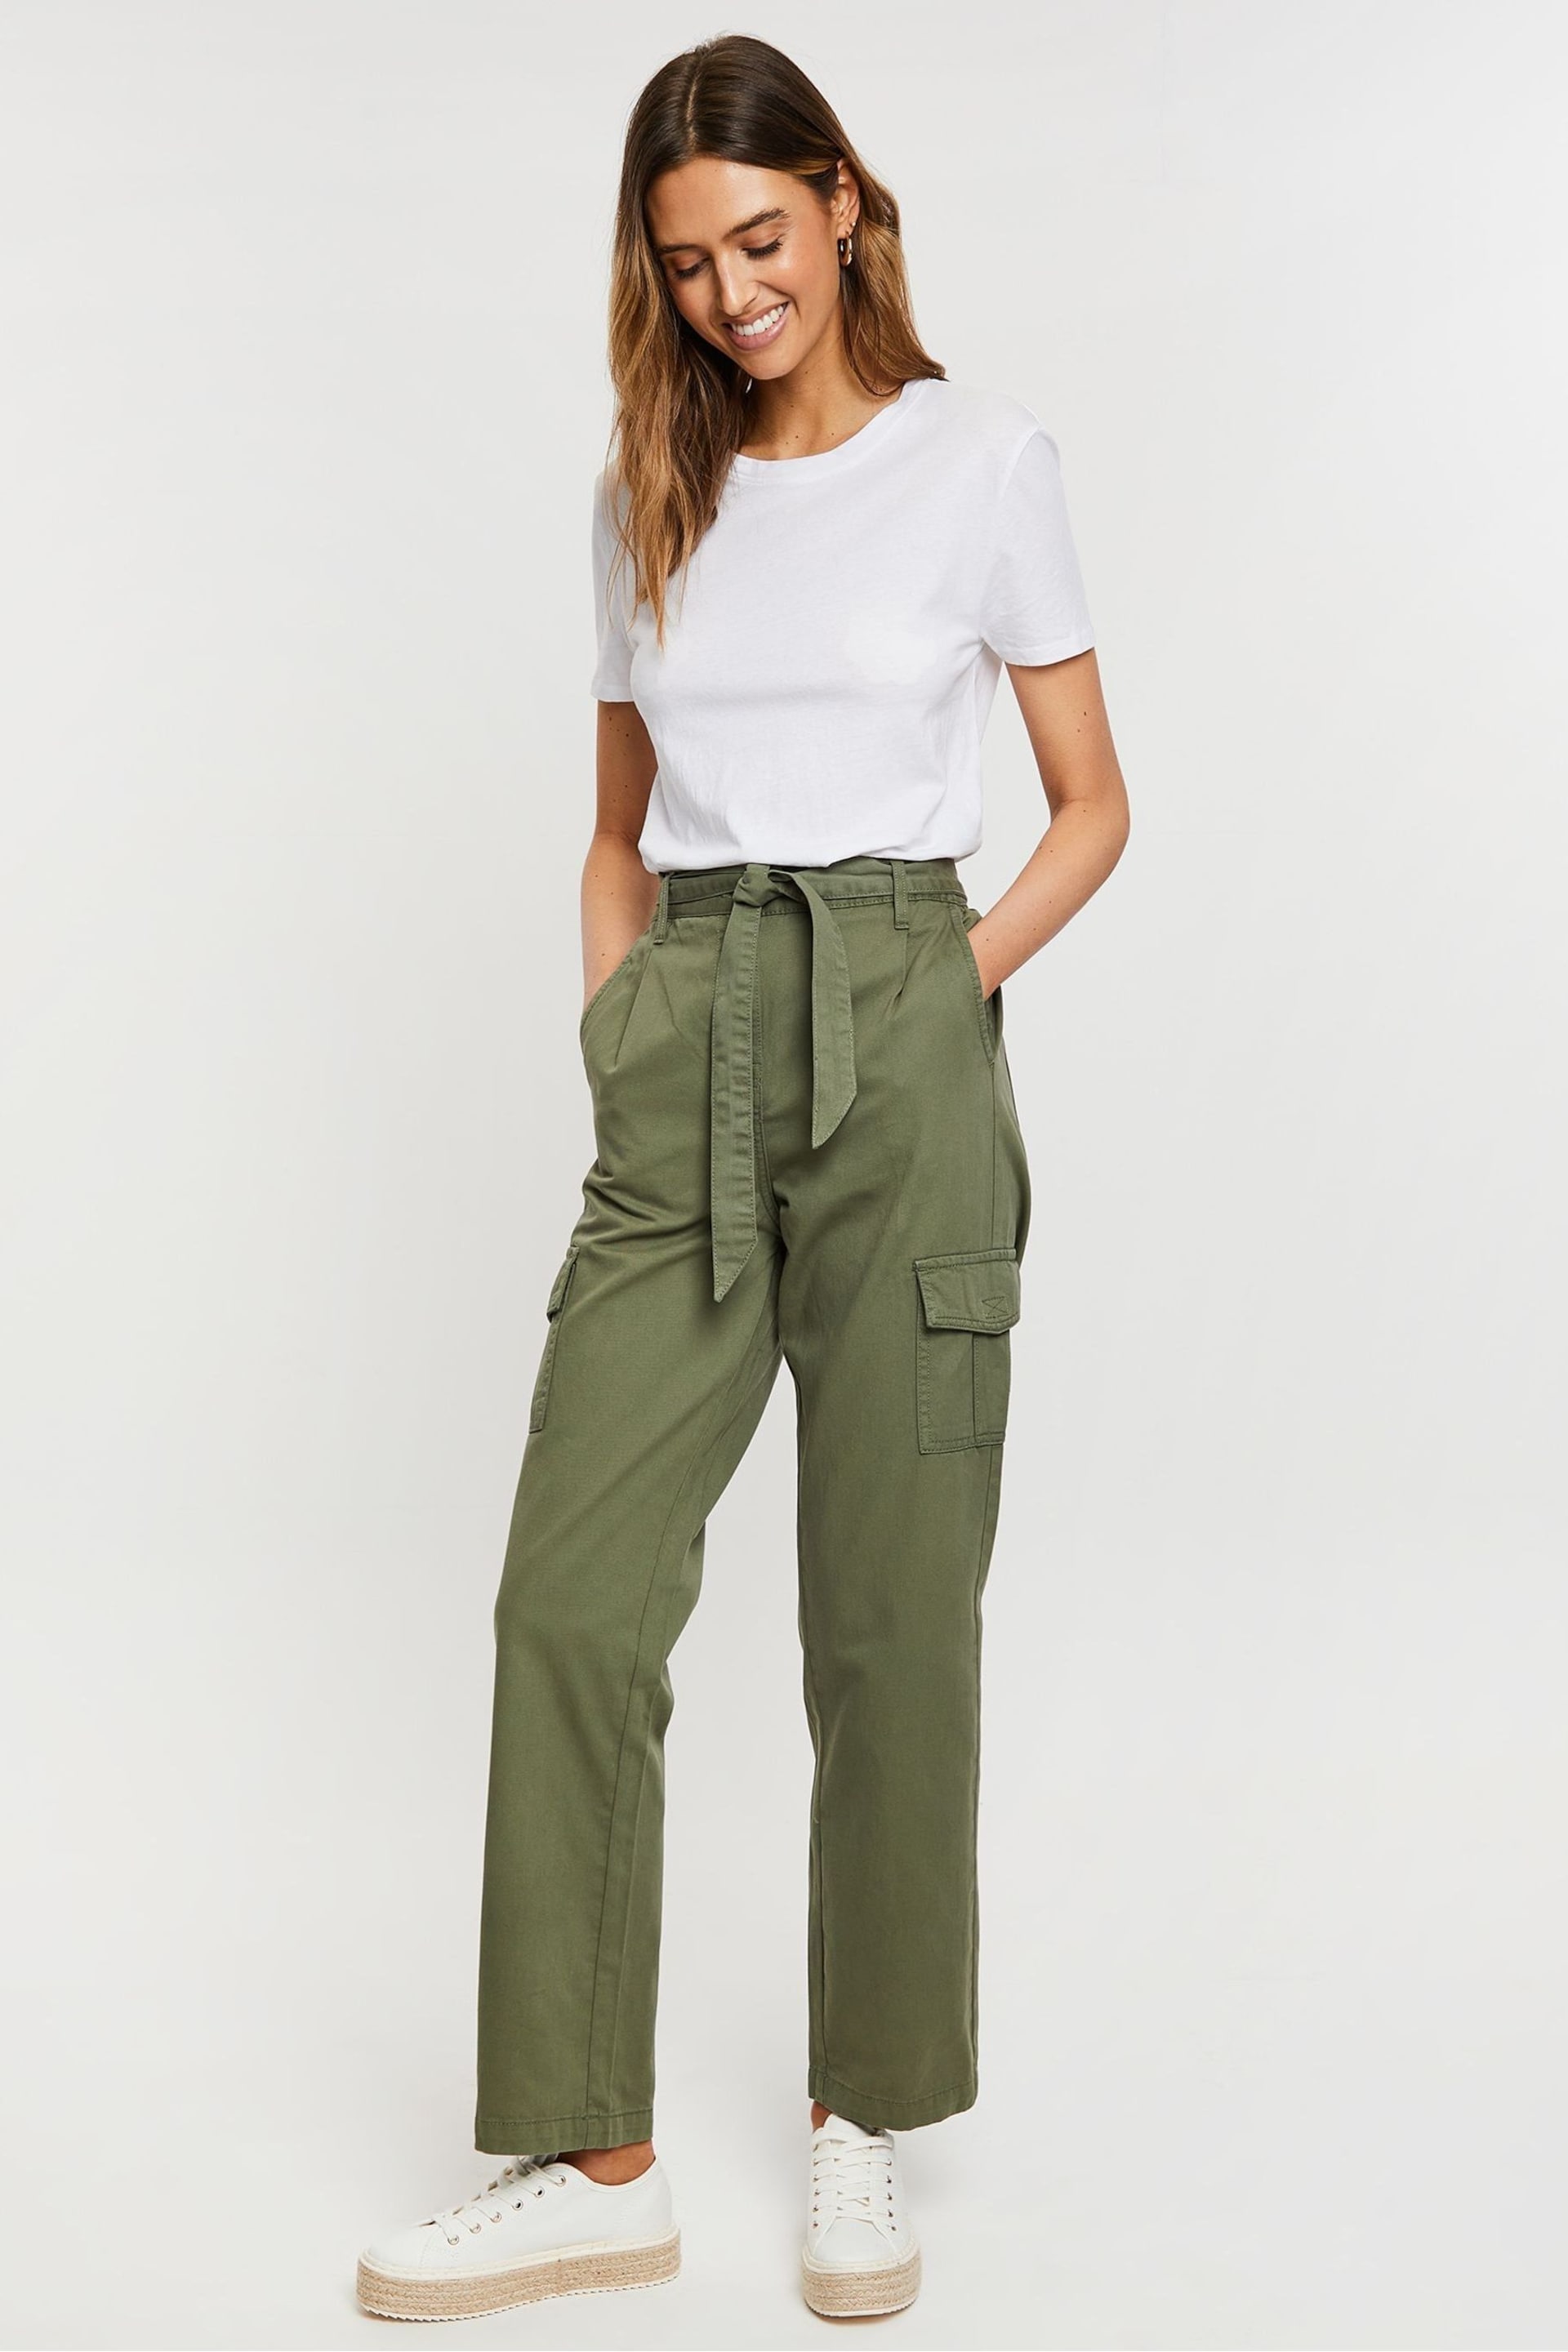 Threadbare Green Cargo Utility Straight Leg Belted Trousers - Image 3 of 4